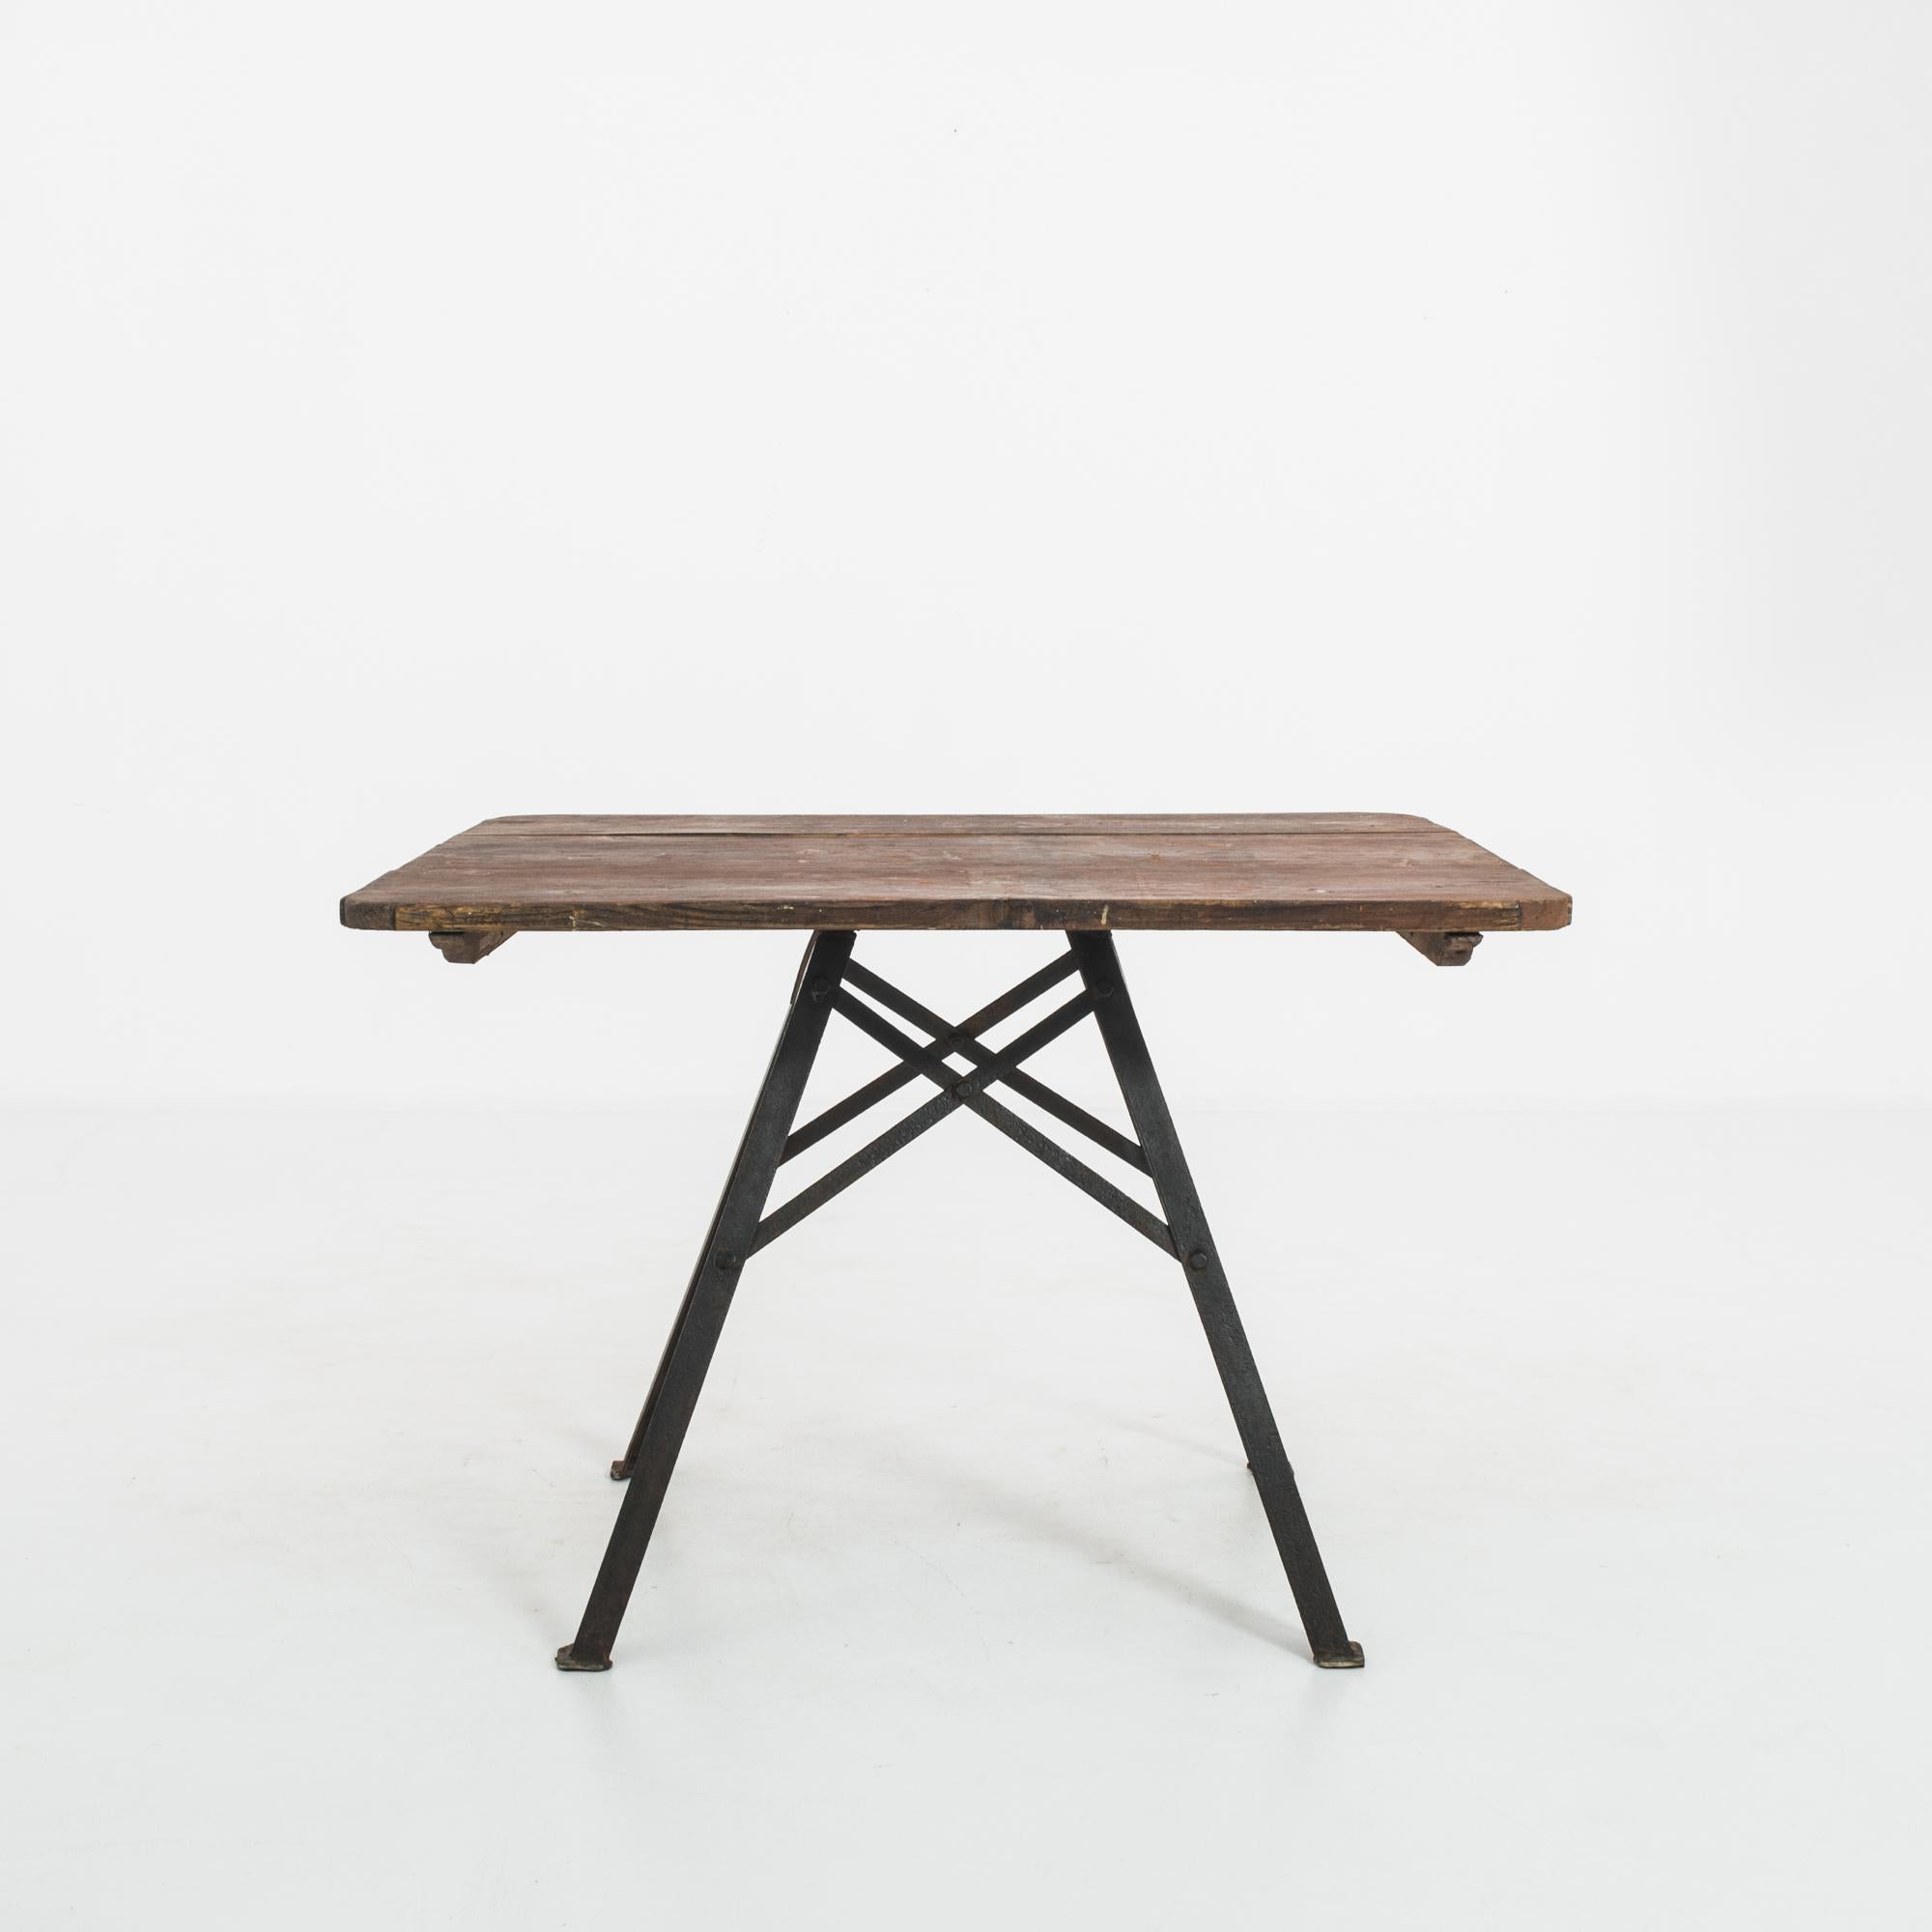 This metal table with a wooden top was made in France and offers an industrial edge with a rustic touch. Planks of wood with a patinated chocolate brown finish comprise the tabletop. Four splayed legs and X-shaped stretchers converge to lend a